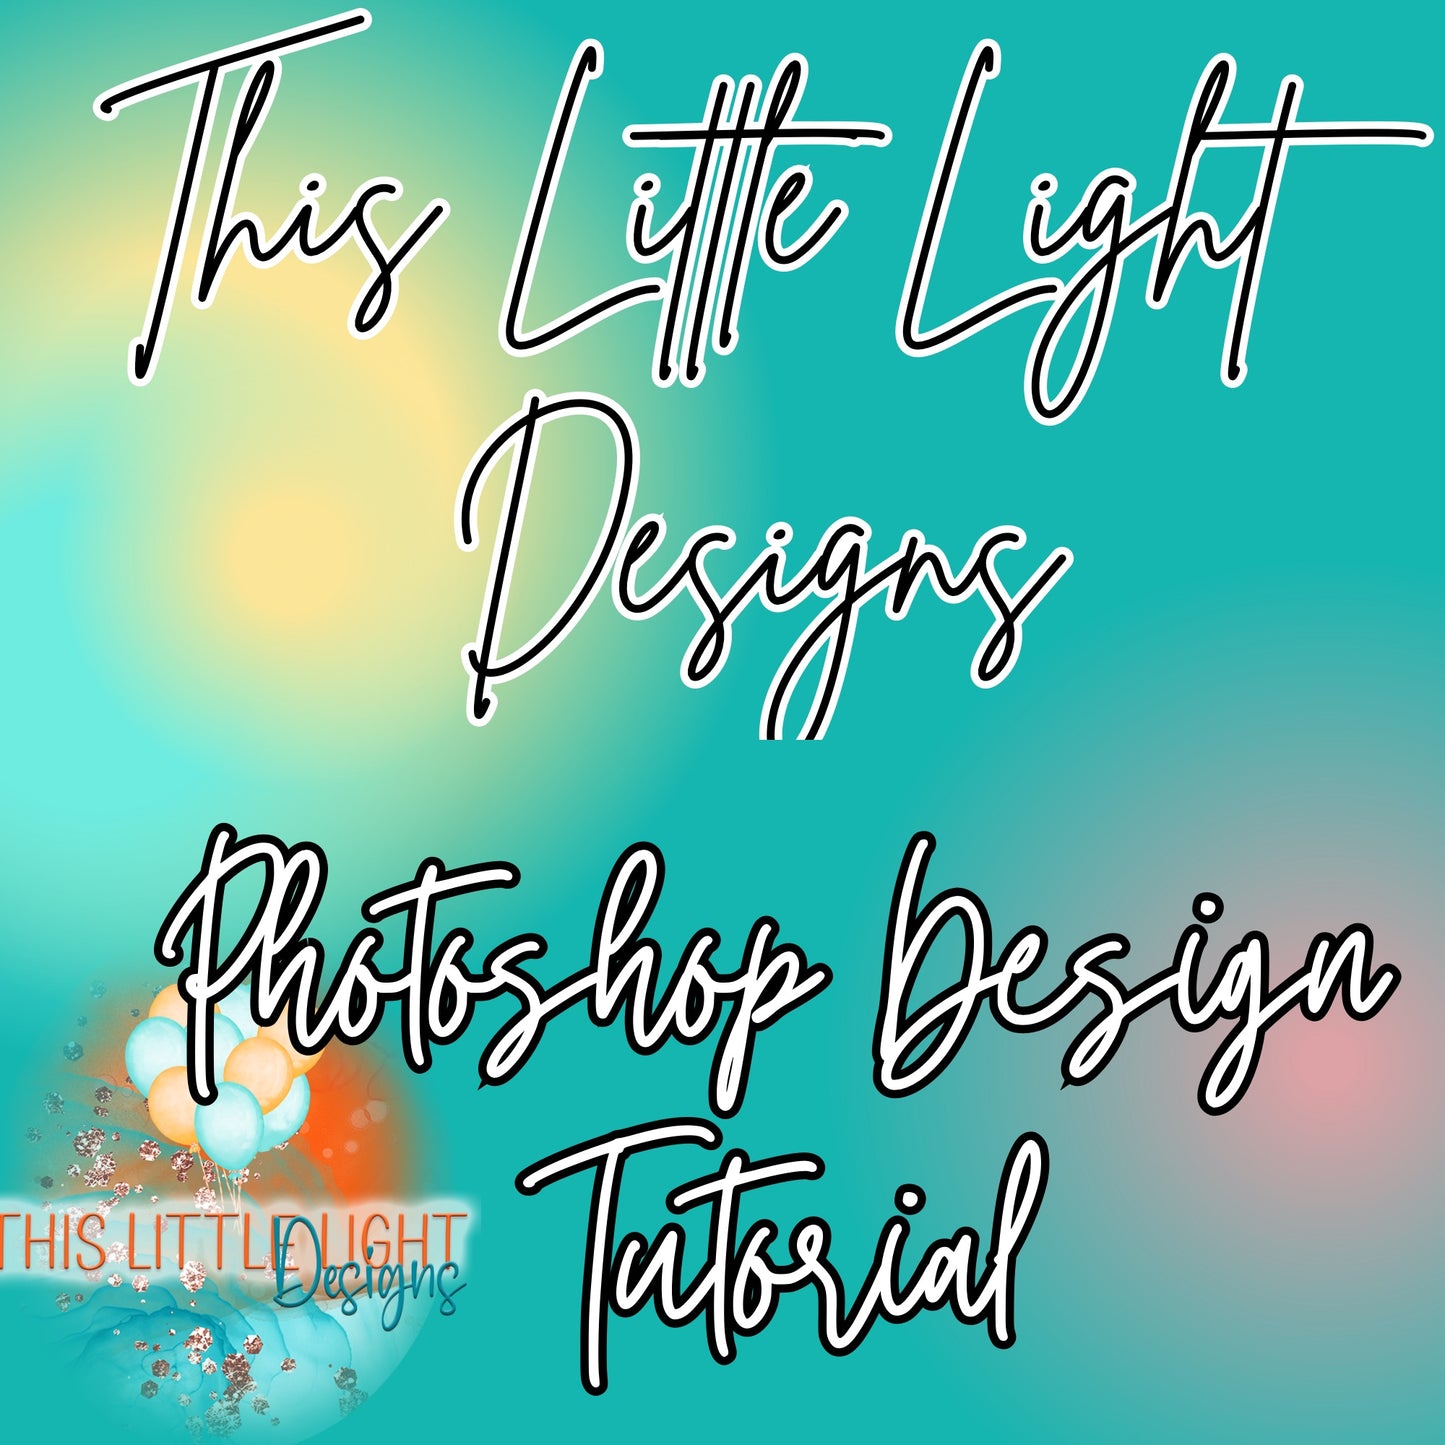 Photoshop Design Beginners Tutorial | Learn How to Design Party Favors In Photoshop | Digital Download